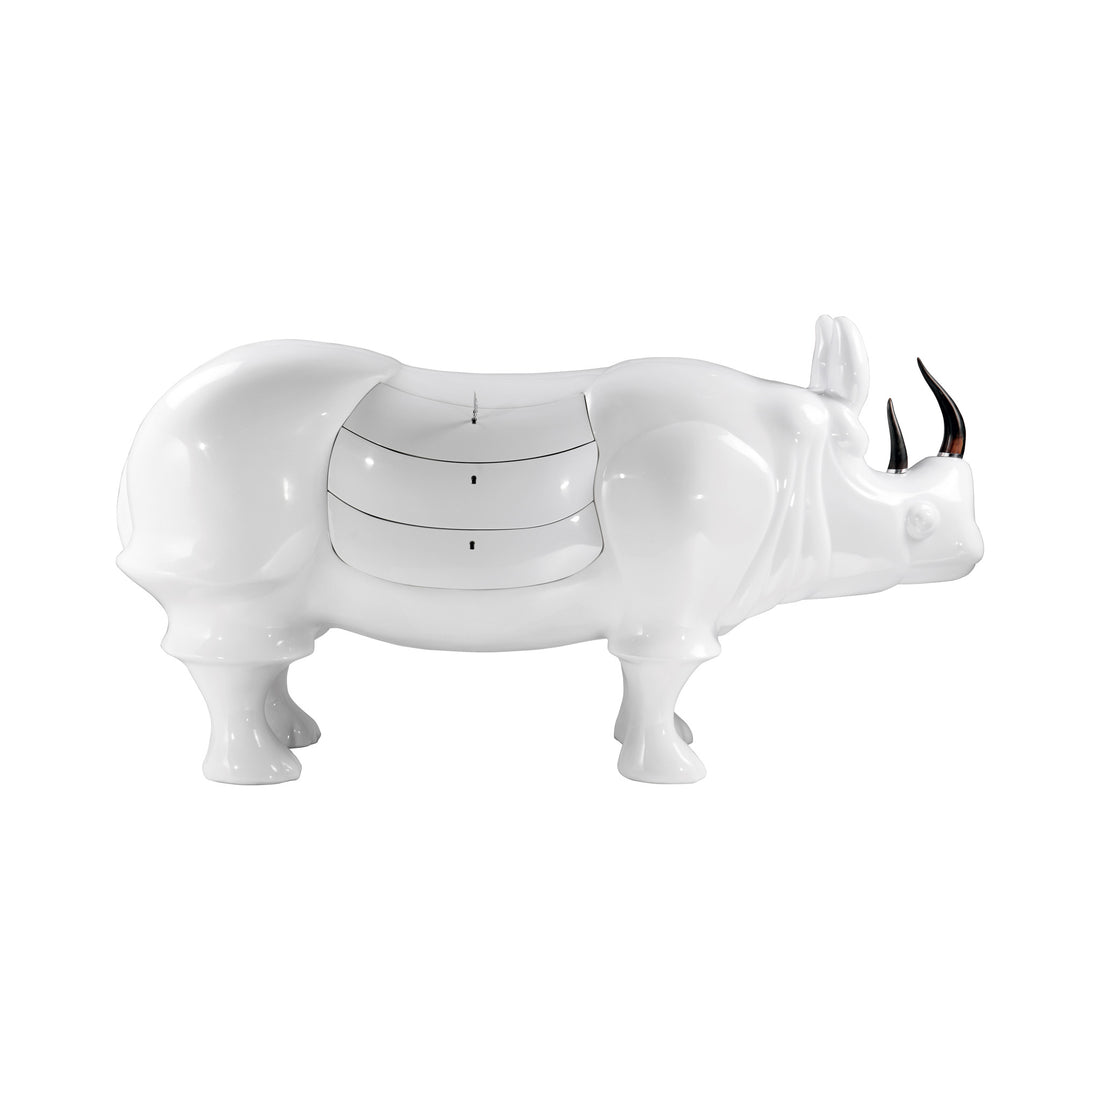 Rhino in White Resin with Drawers